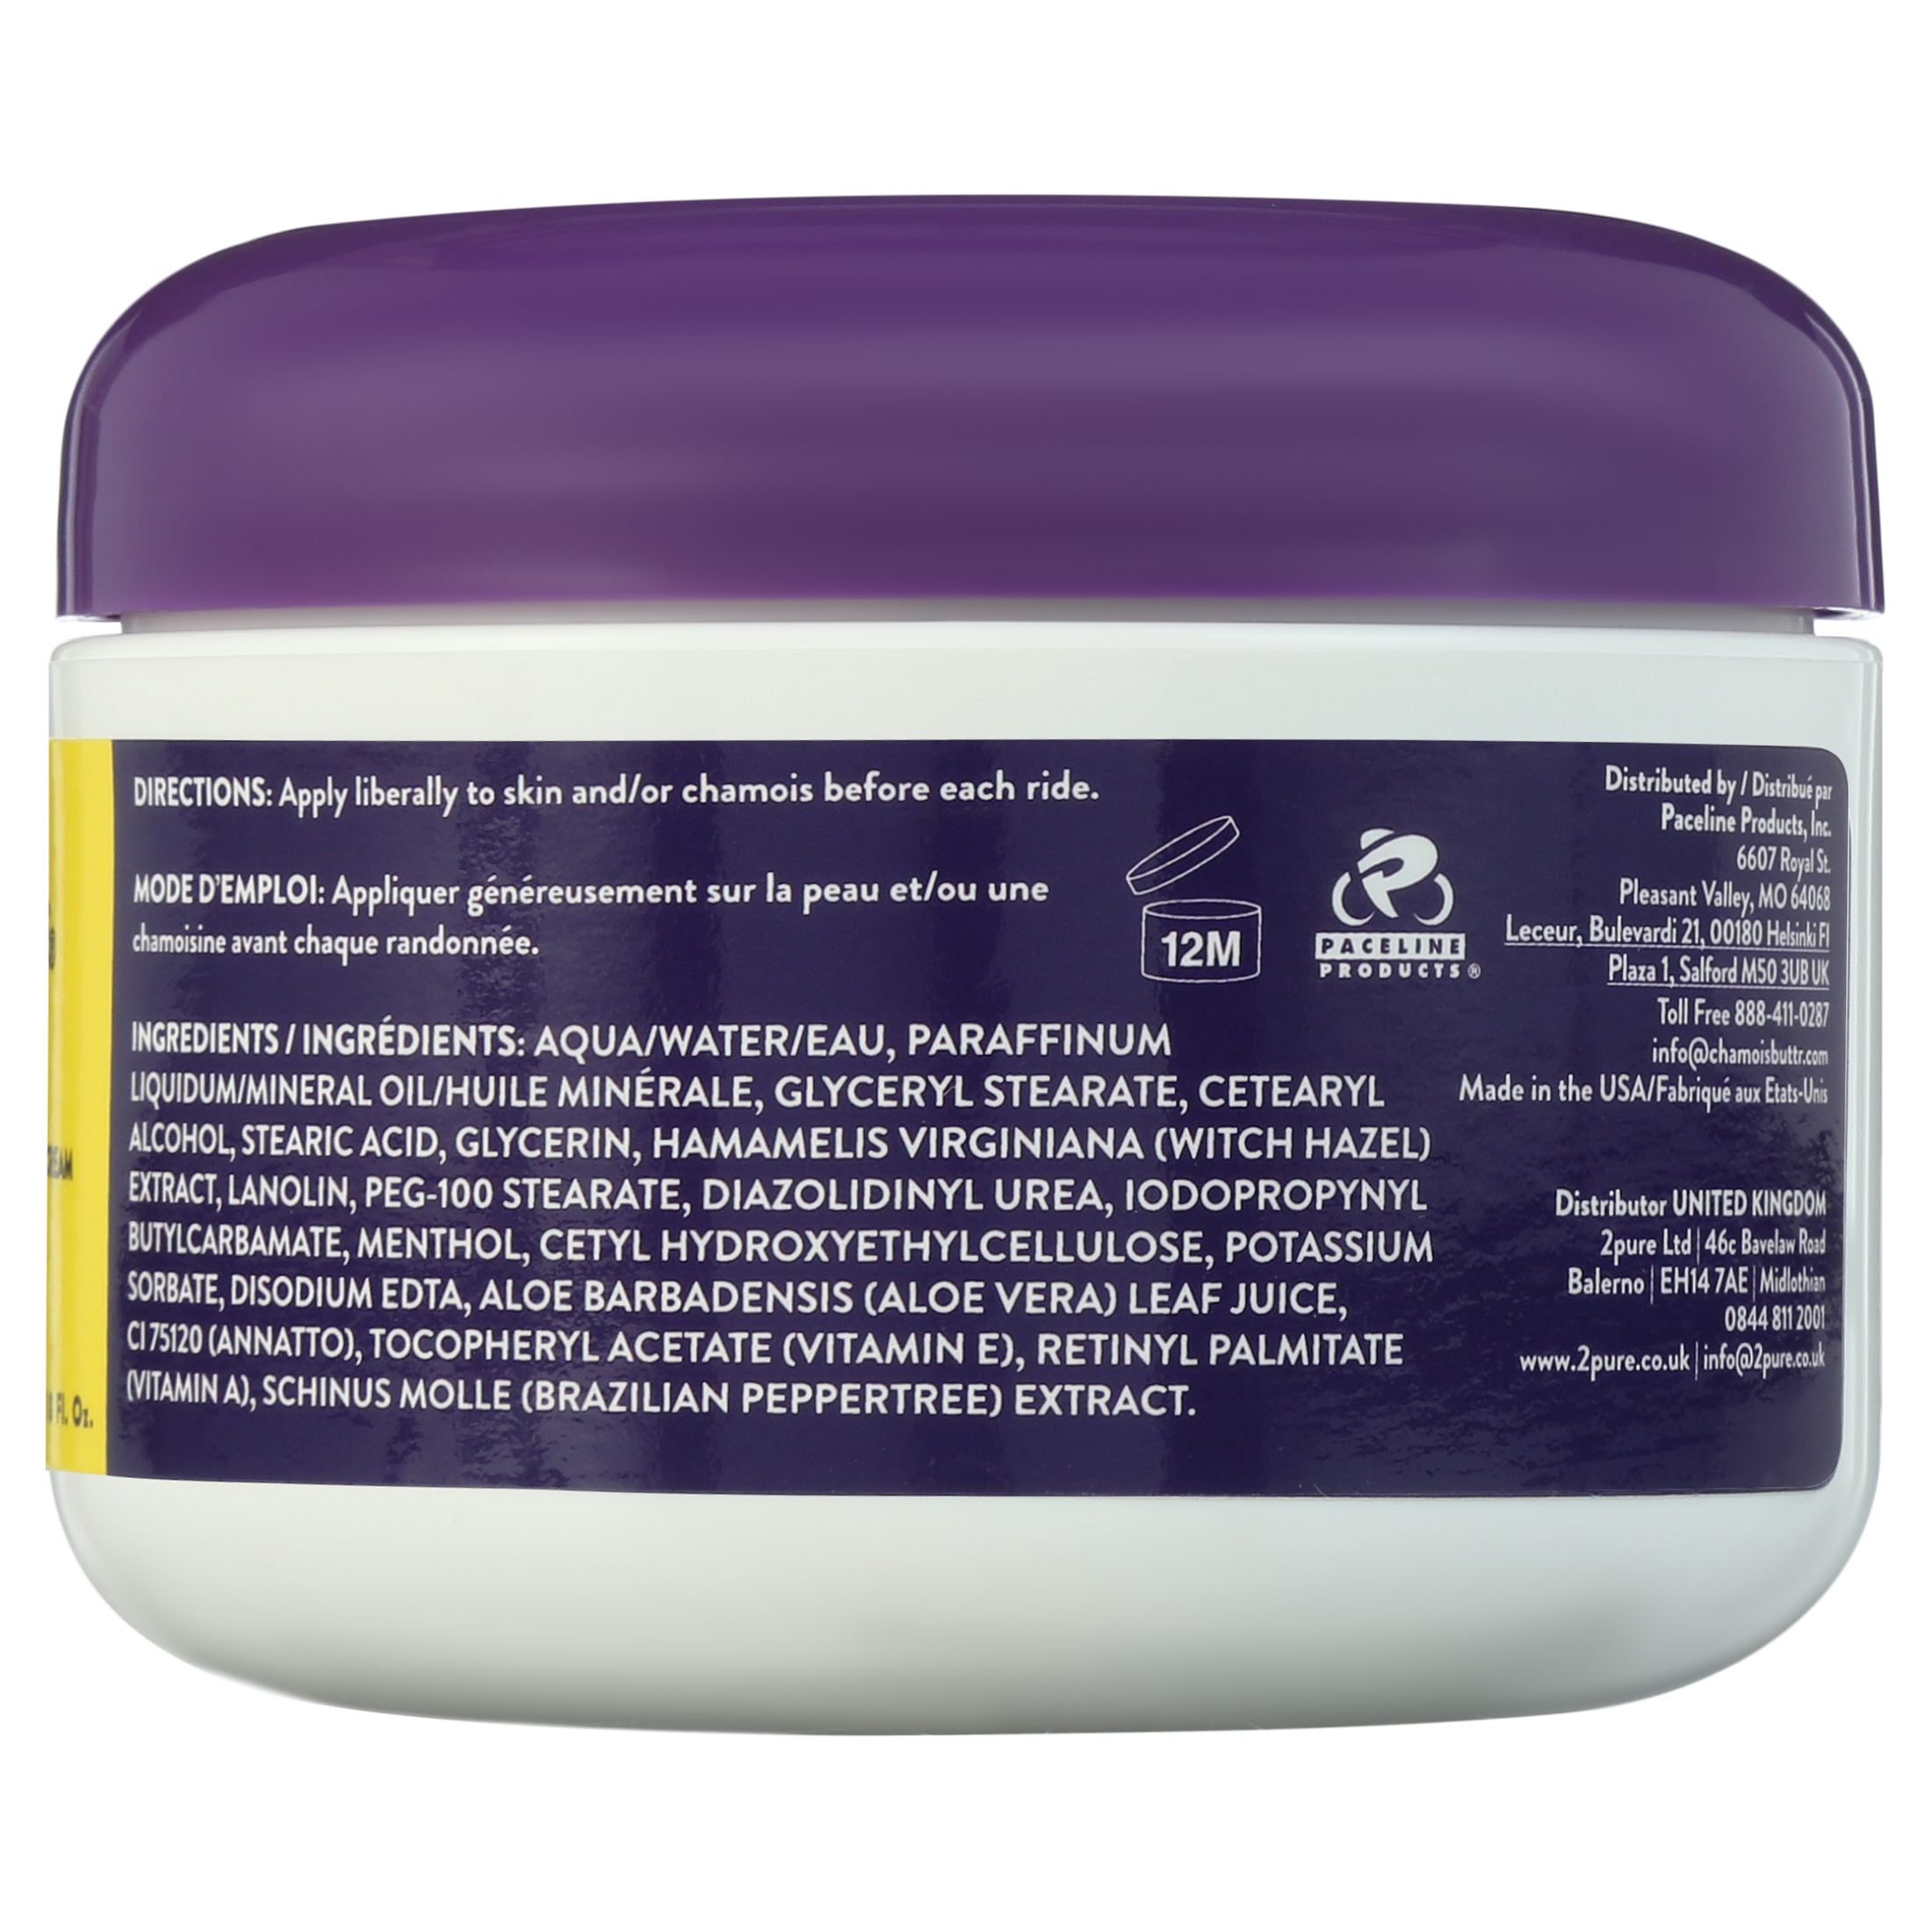 Chamois Buttr Eurostyle Anti Chafe Cream Non-Greasy Lubricant 8 Ounce Jar - image 3 of 7